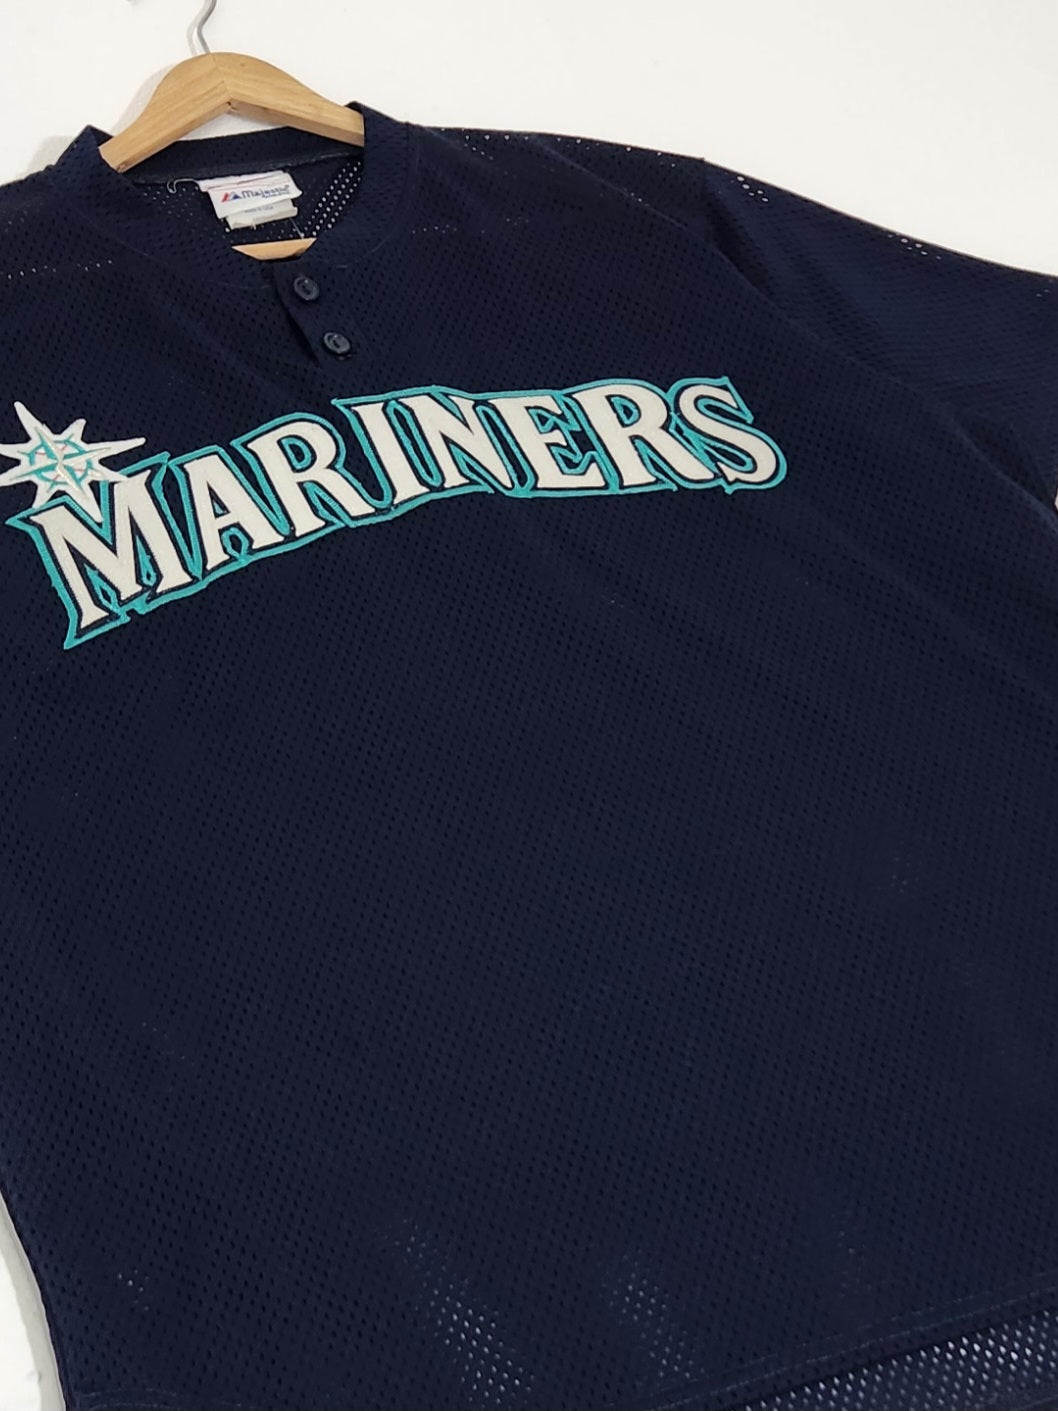 navy seattle mariners jersey